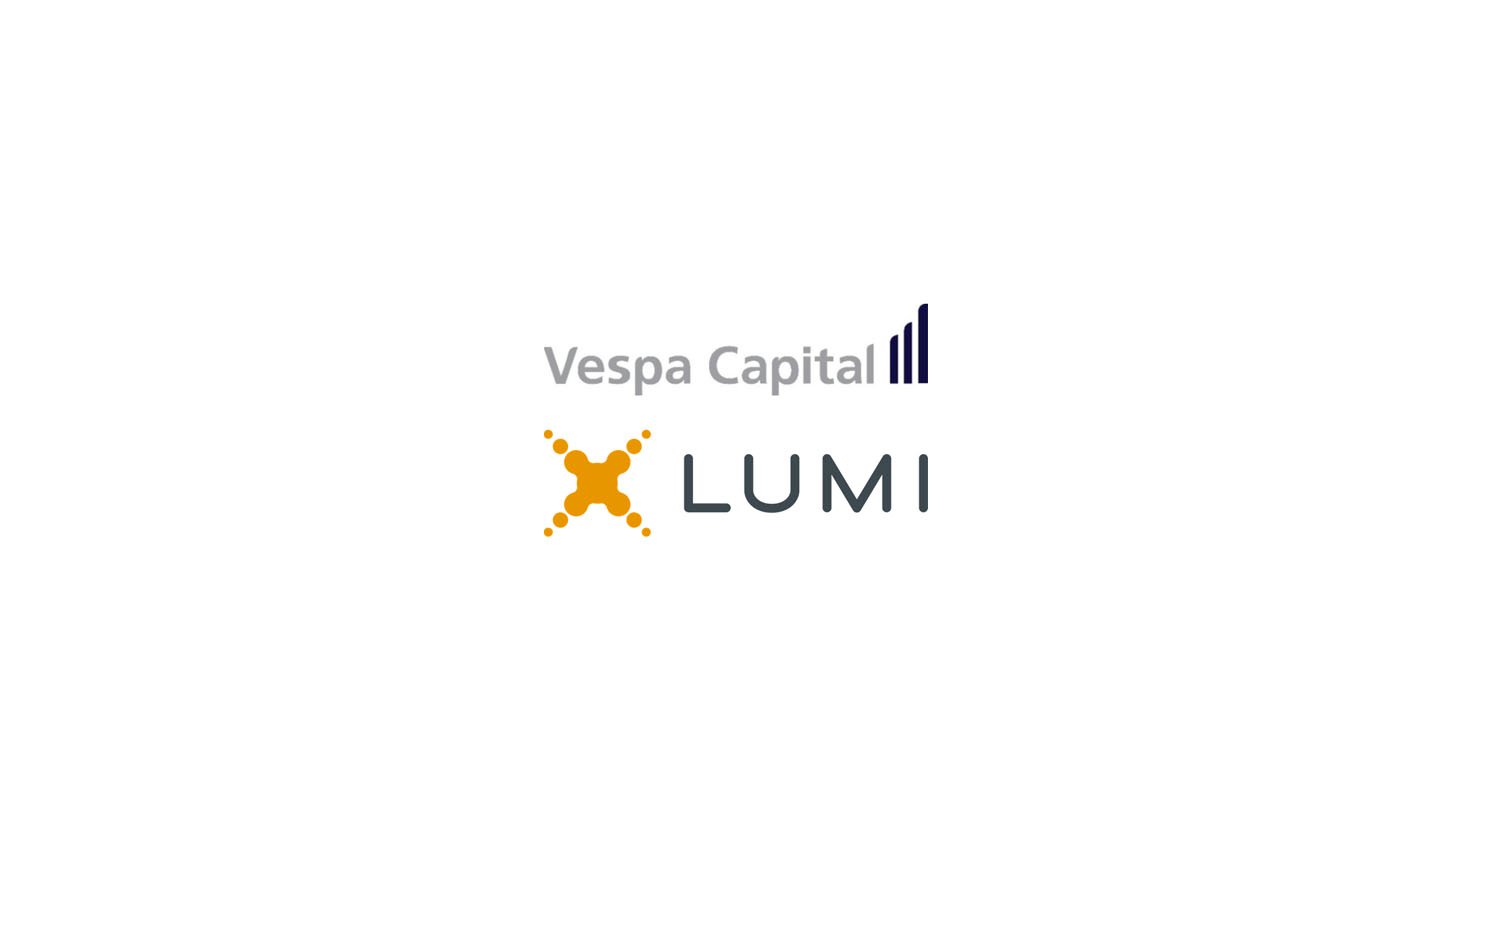 Vespa Capital invests in Lumi, an industry leader in AGM...